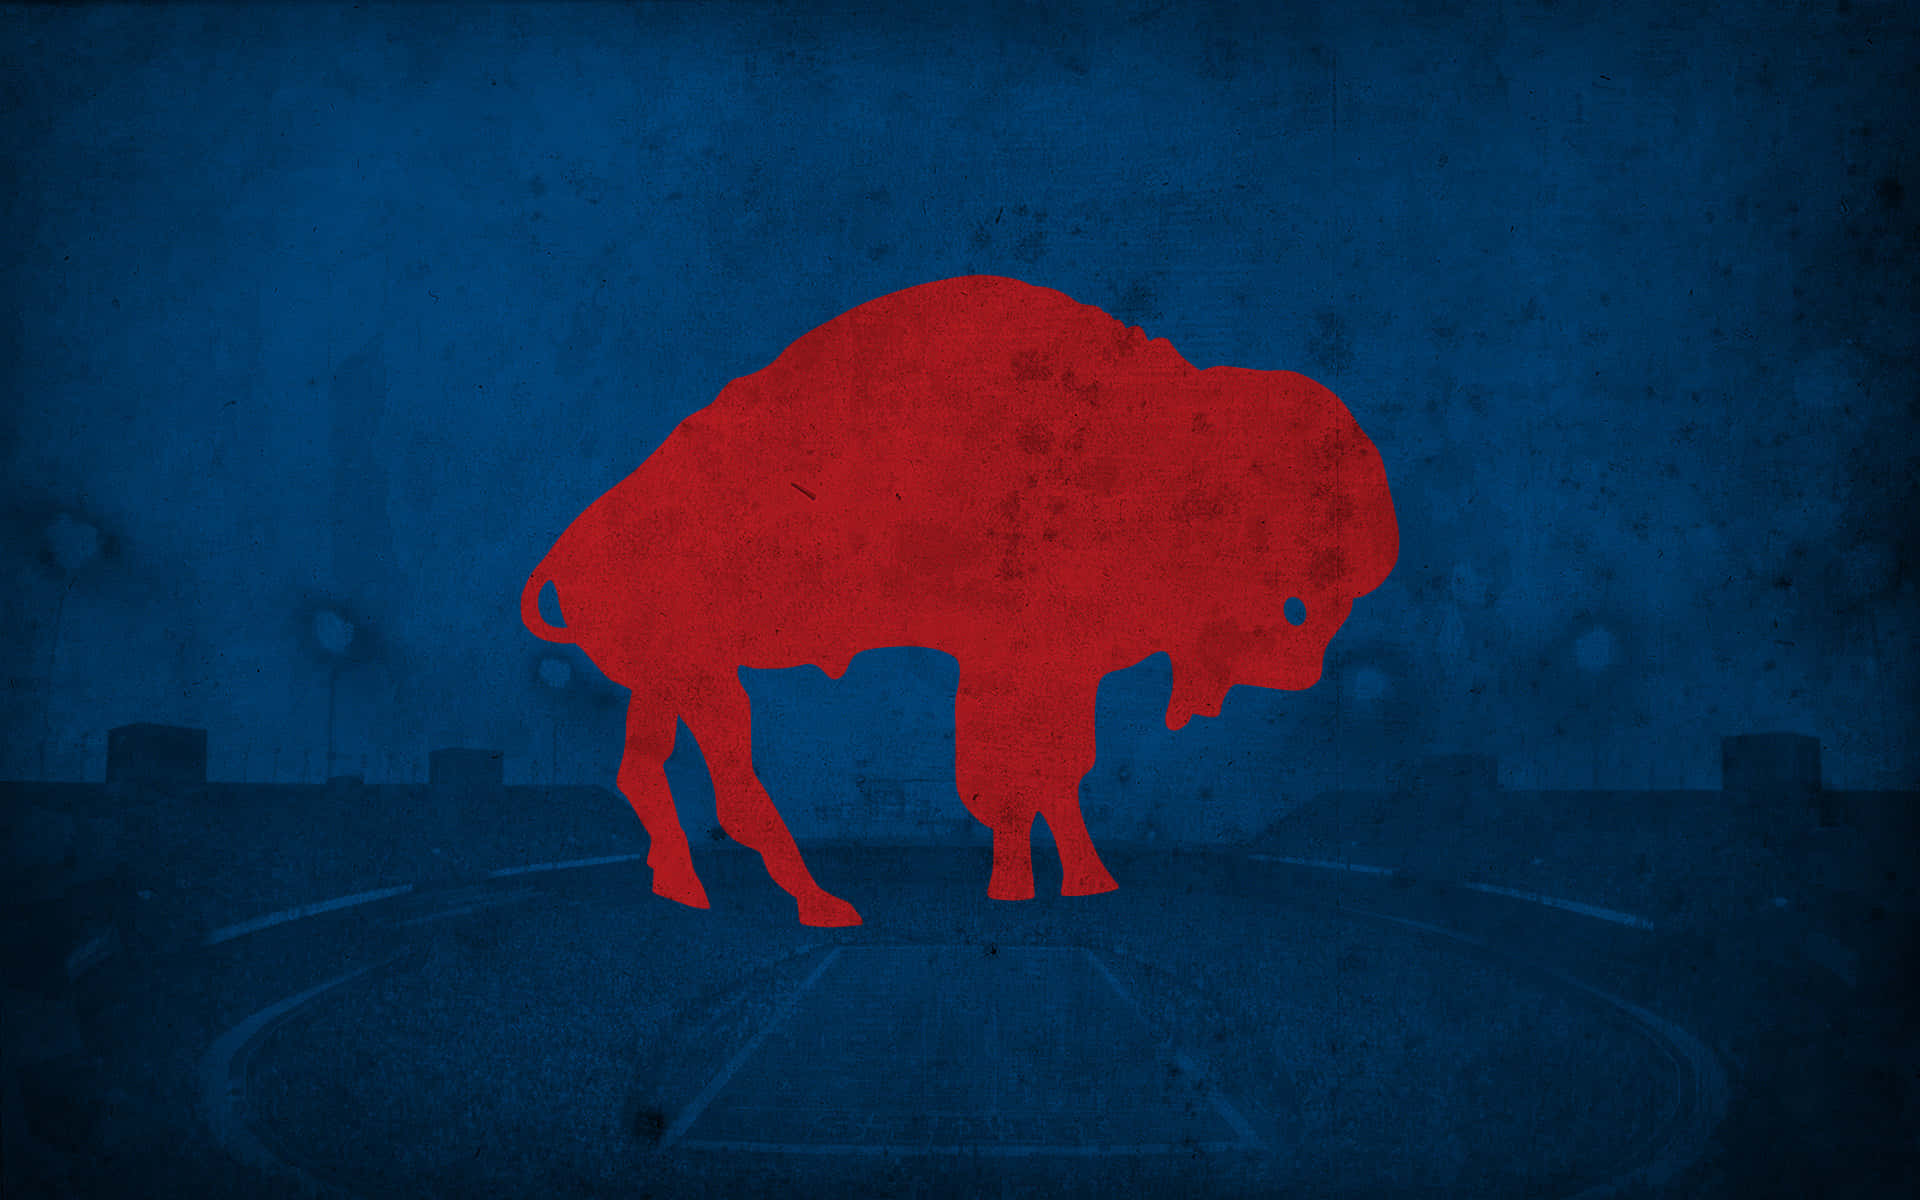 "Experience the intensity of Buffalo Bills games!"